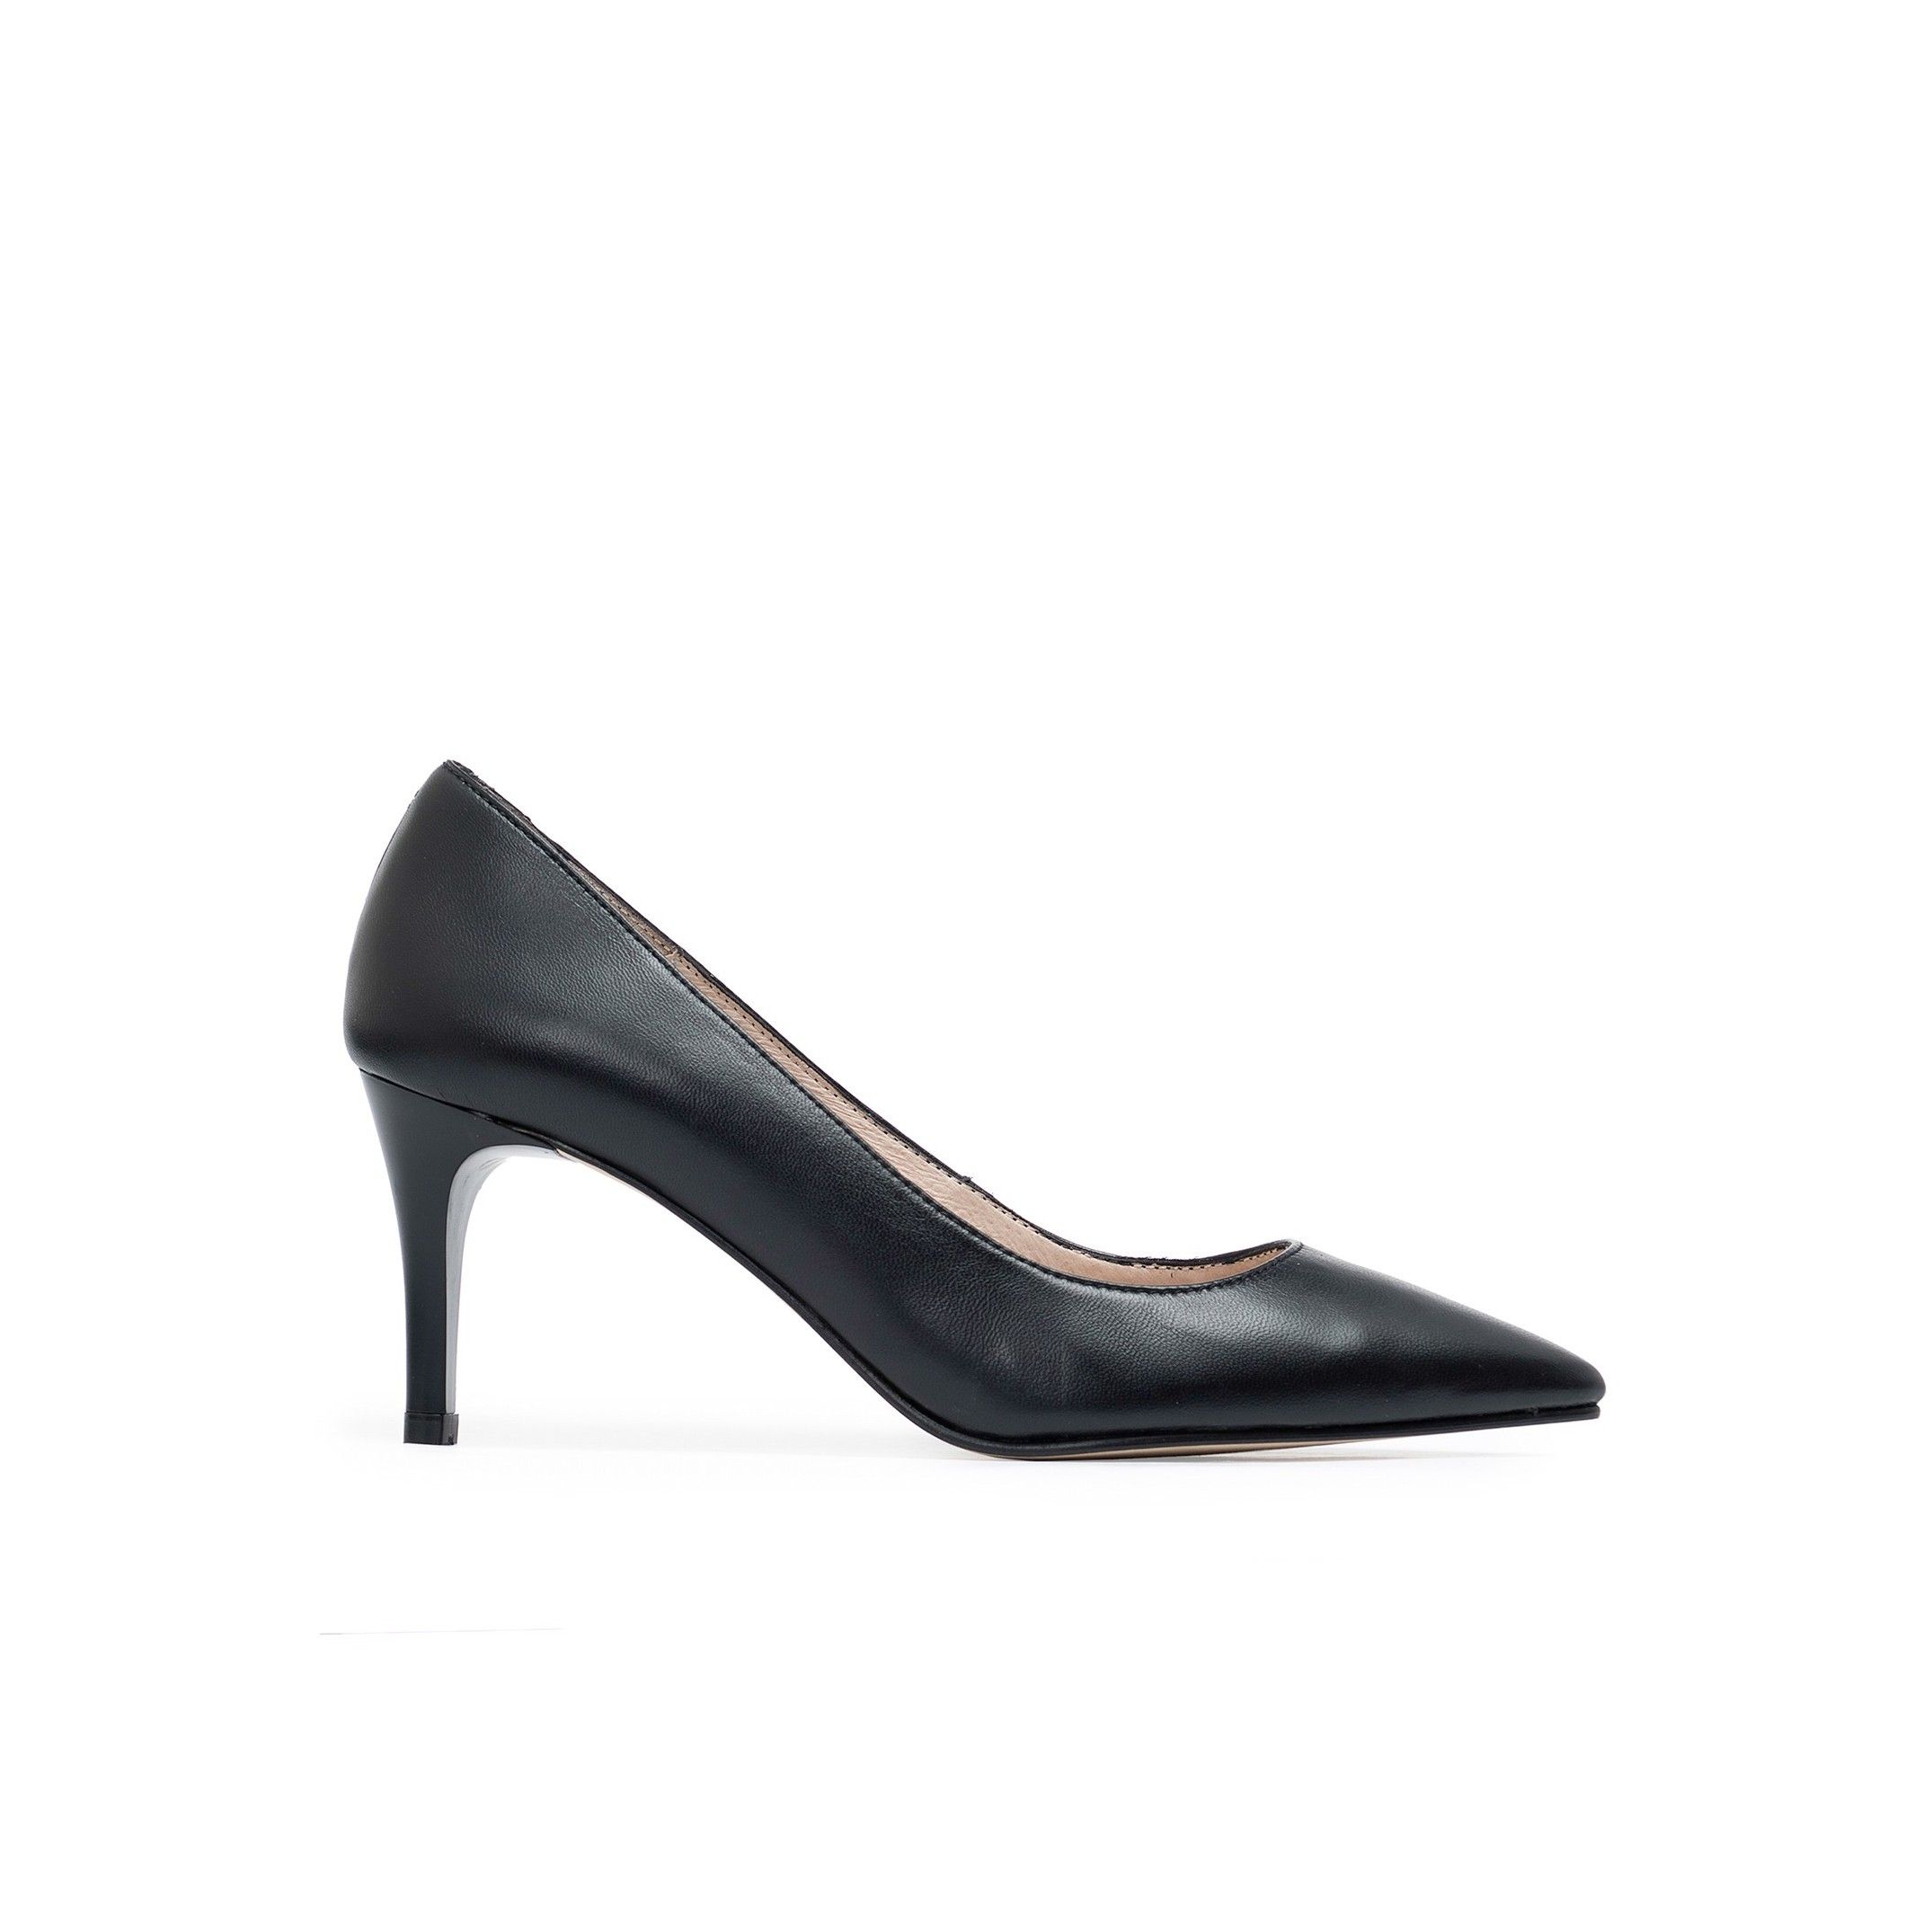 Closed Toe Pumps for Women